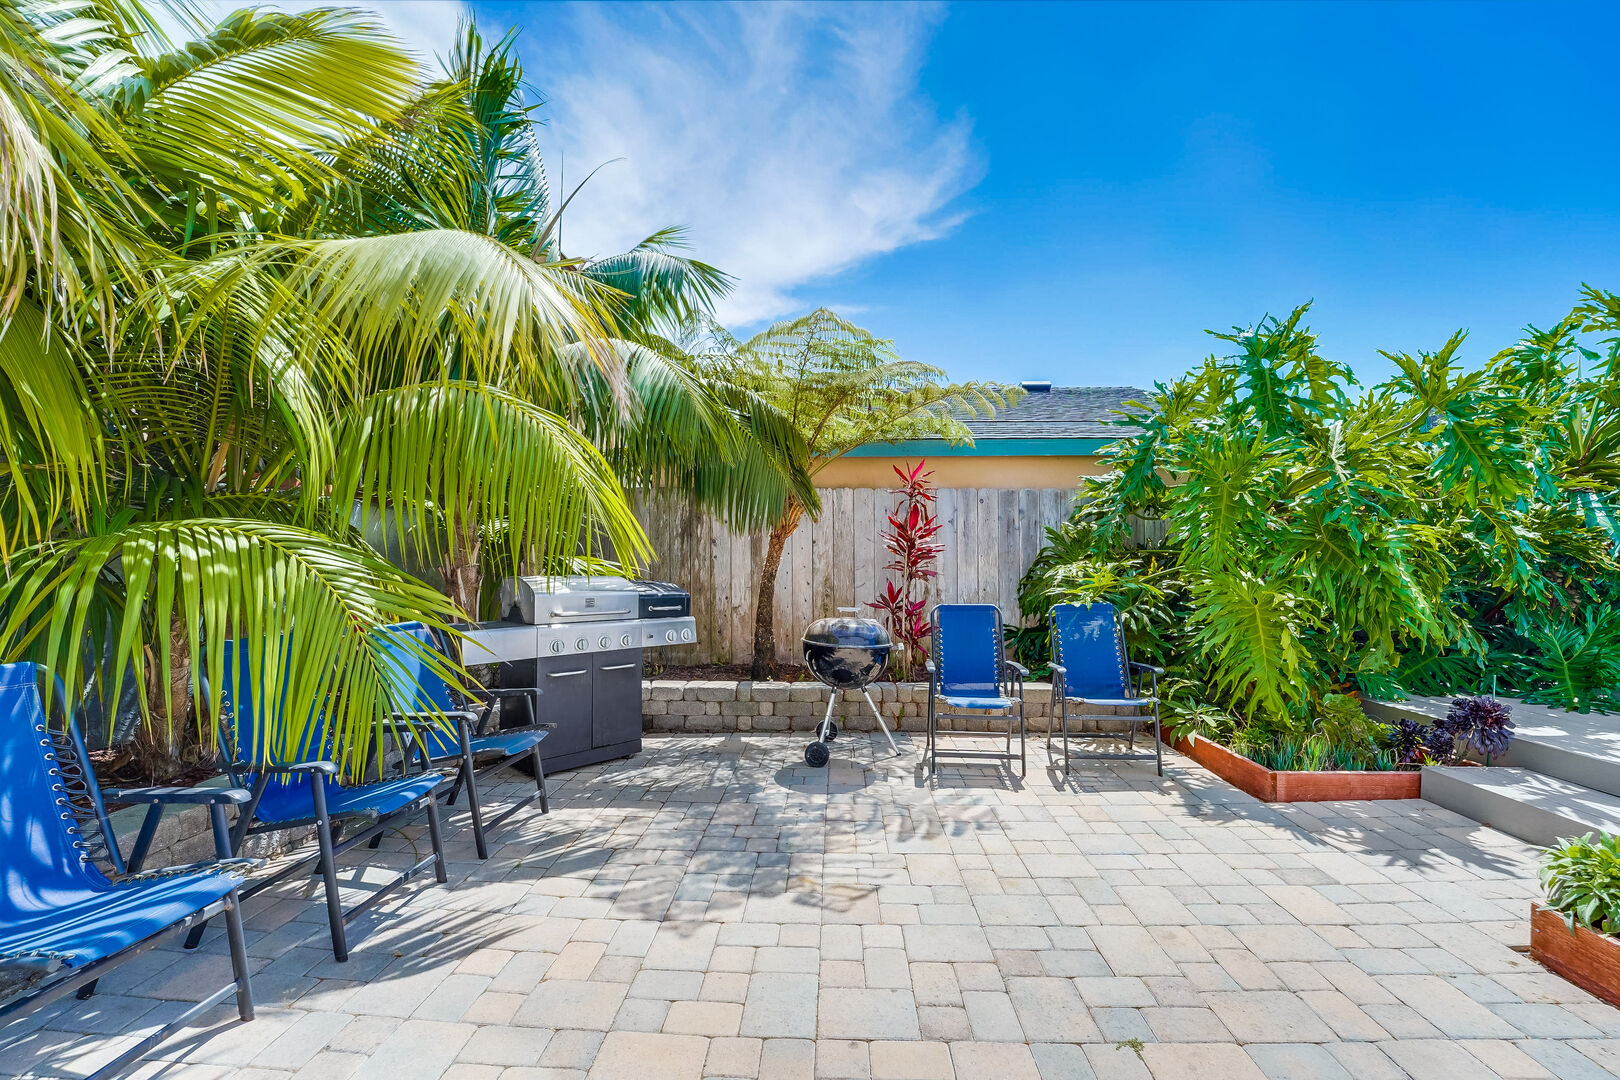 Backyard patio has a large, propane grill and smaller BBQ